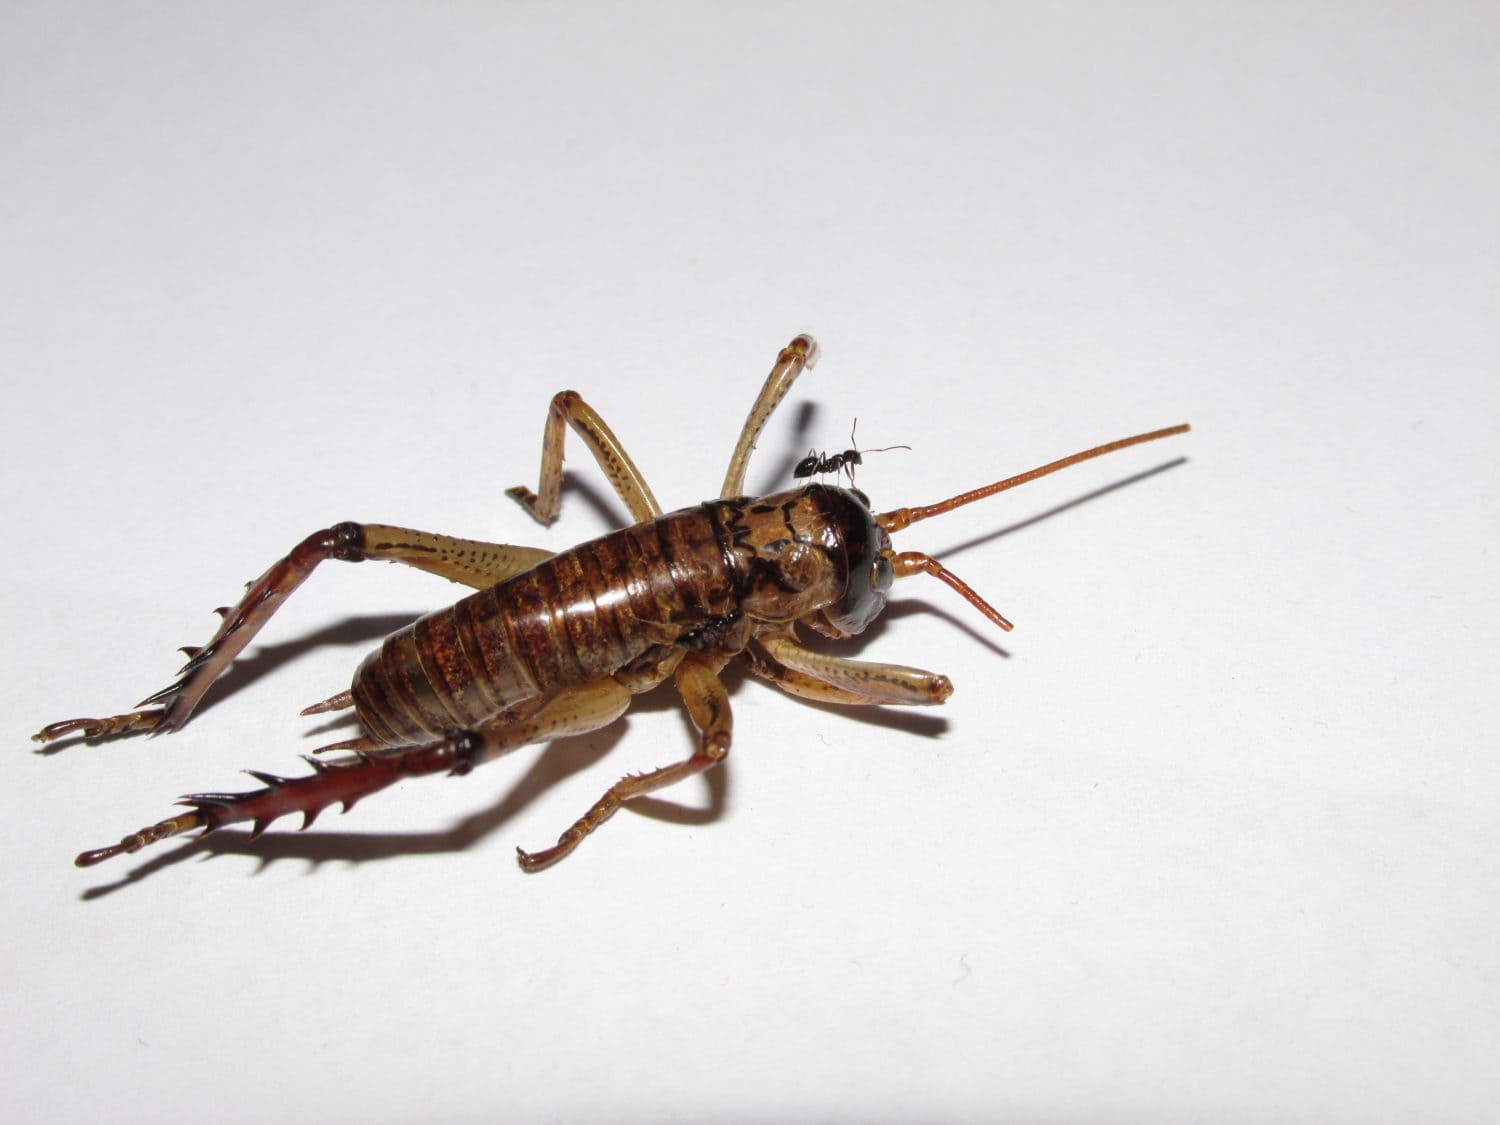 A New Zealand Weta with a black ant standing on its head